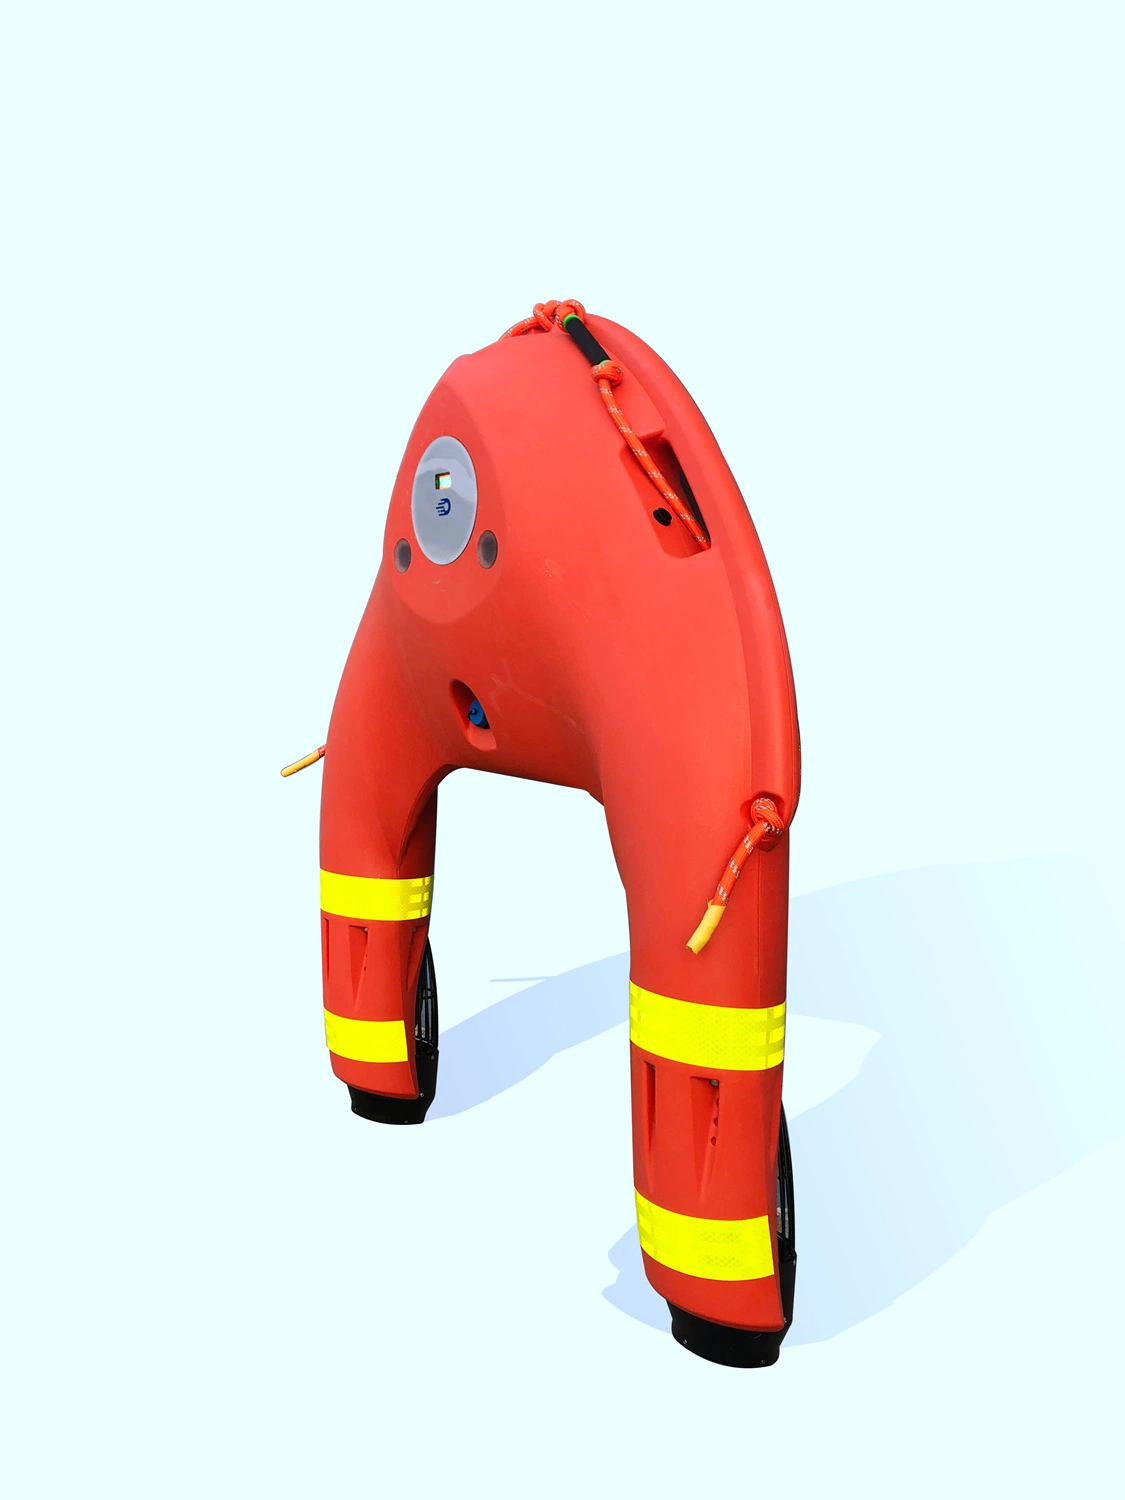 Intelligent Electric Unmanned Life Buoy Water Rescue Robot Remote Control Lifesaving Equipment with CE Certification